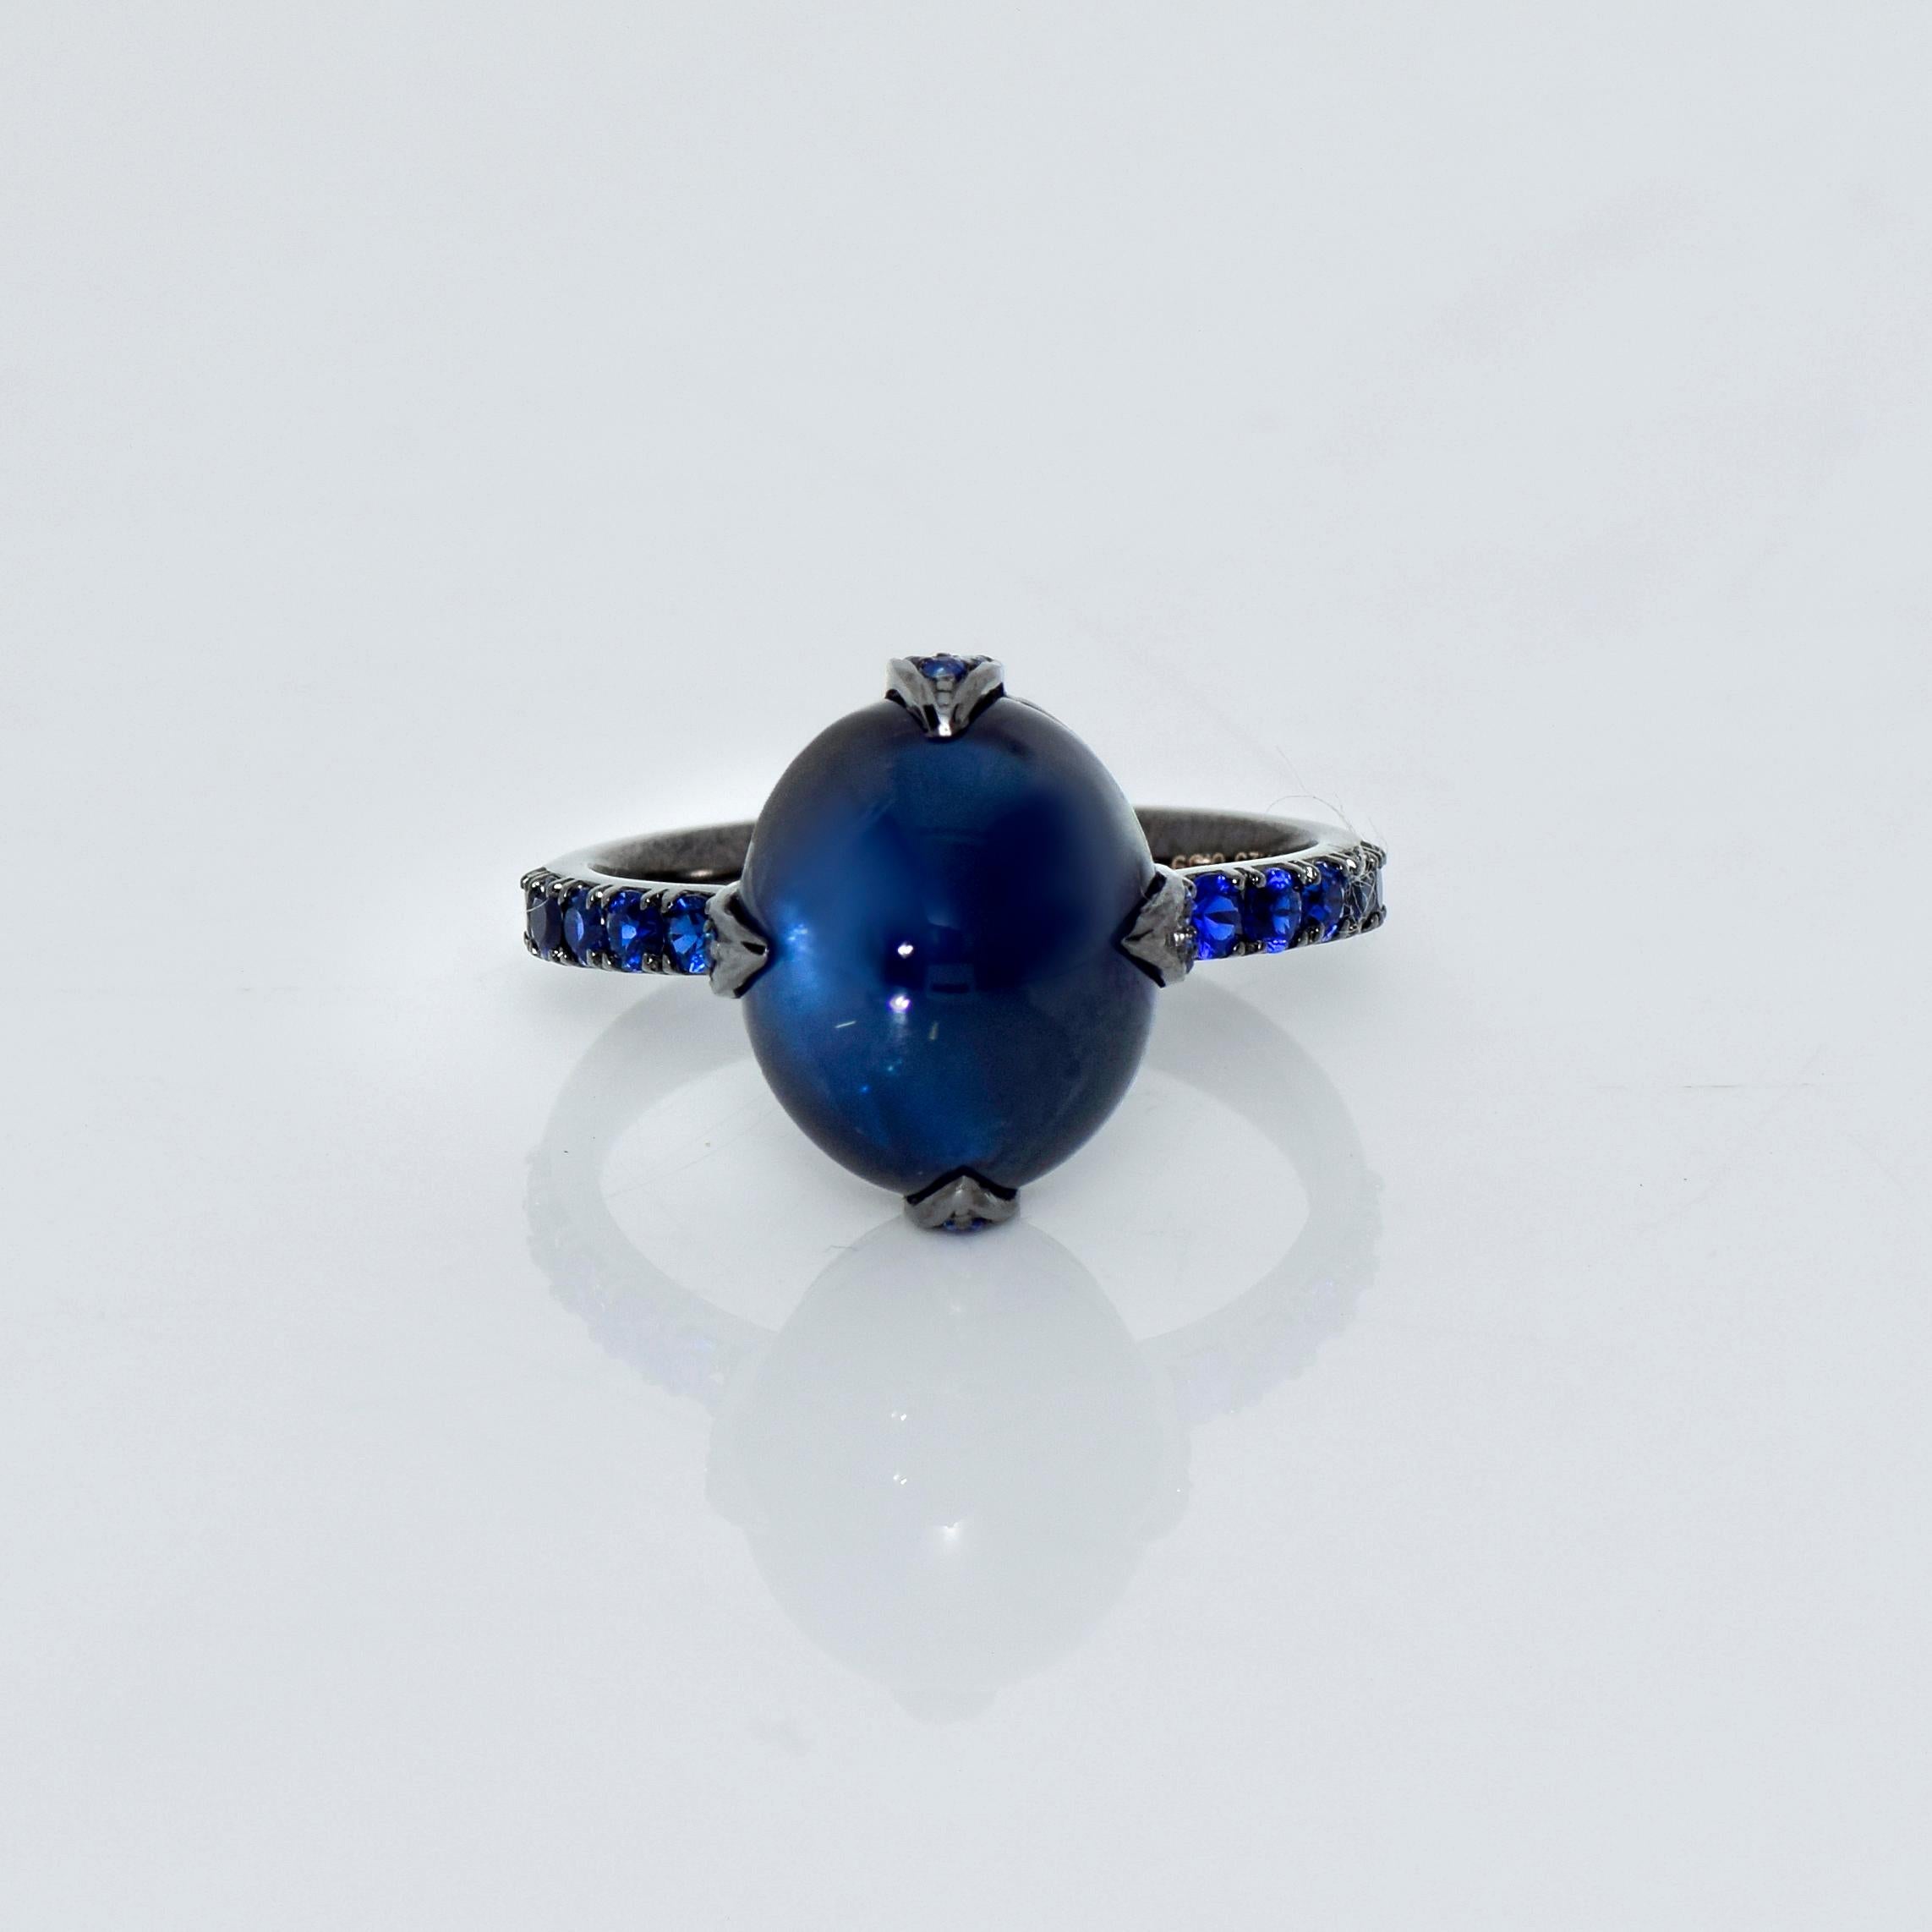 *IGI 14k 7.25 Ct Blue Sapphire Antique Art Deco Engagement Ring*
An IGI-Certified natural cabochon deep blue sapphire weighing 7.25 ct sets on the 14K black gold mixed pave' band with natural royal blue sapphires weighing 0.59 ct.

The 4 prongs